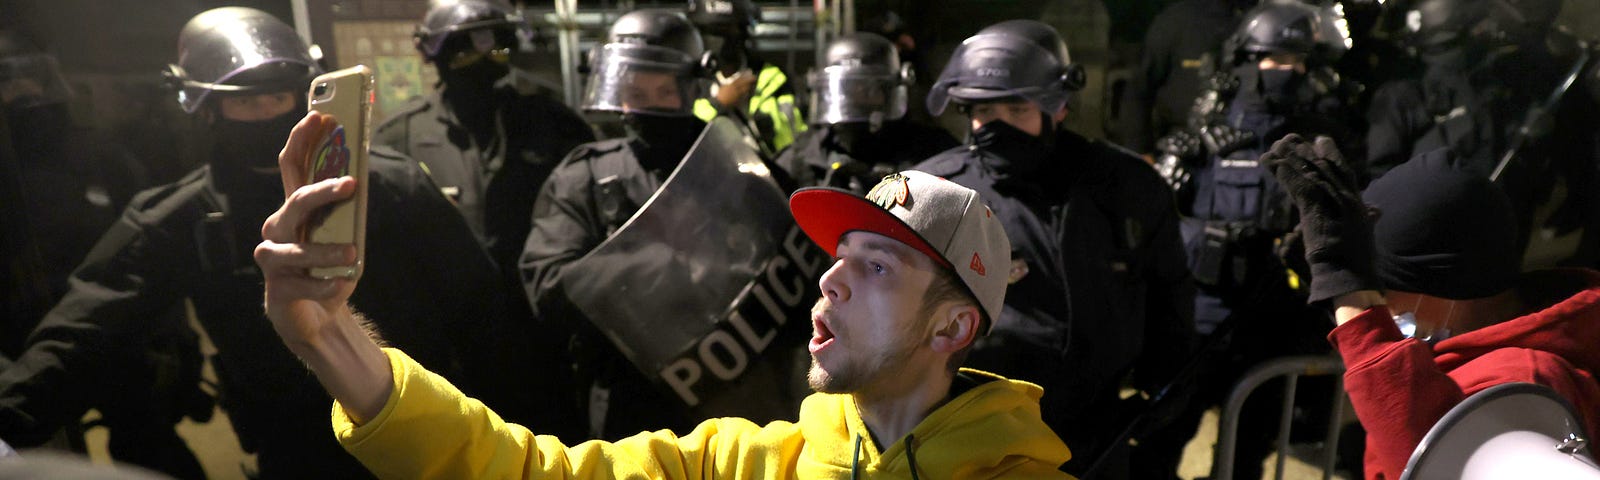 A man takes a selfie photo with police officers in riot gear